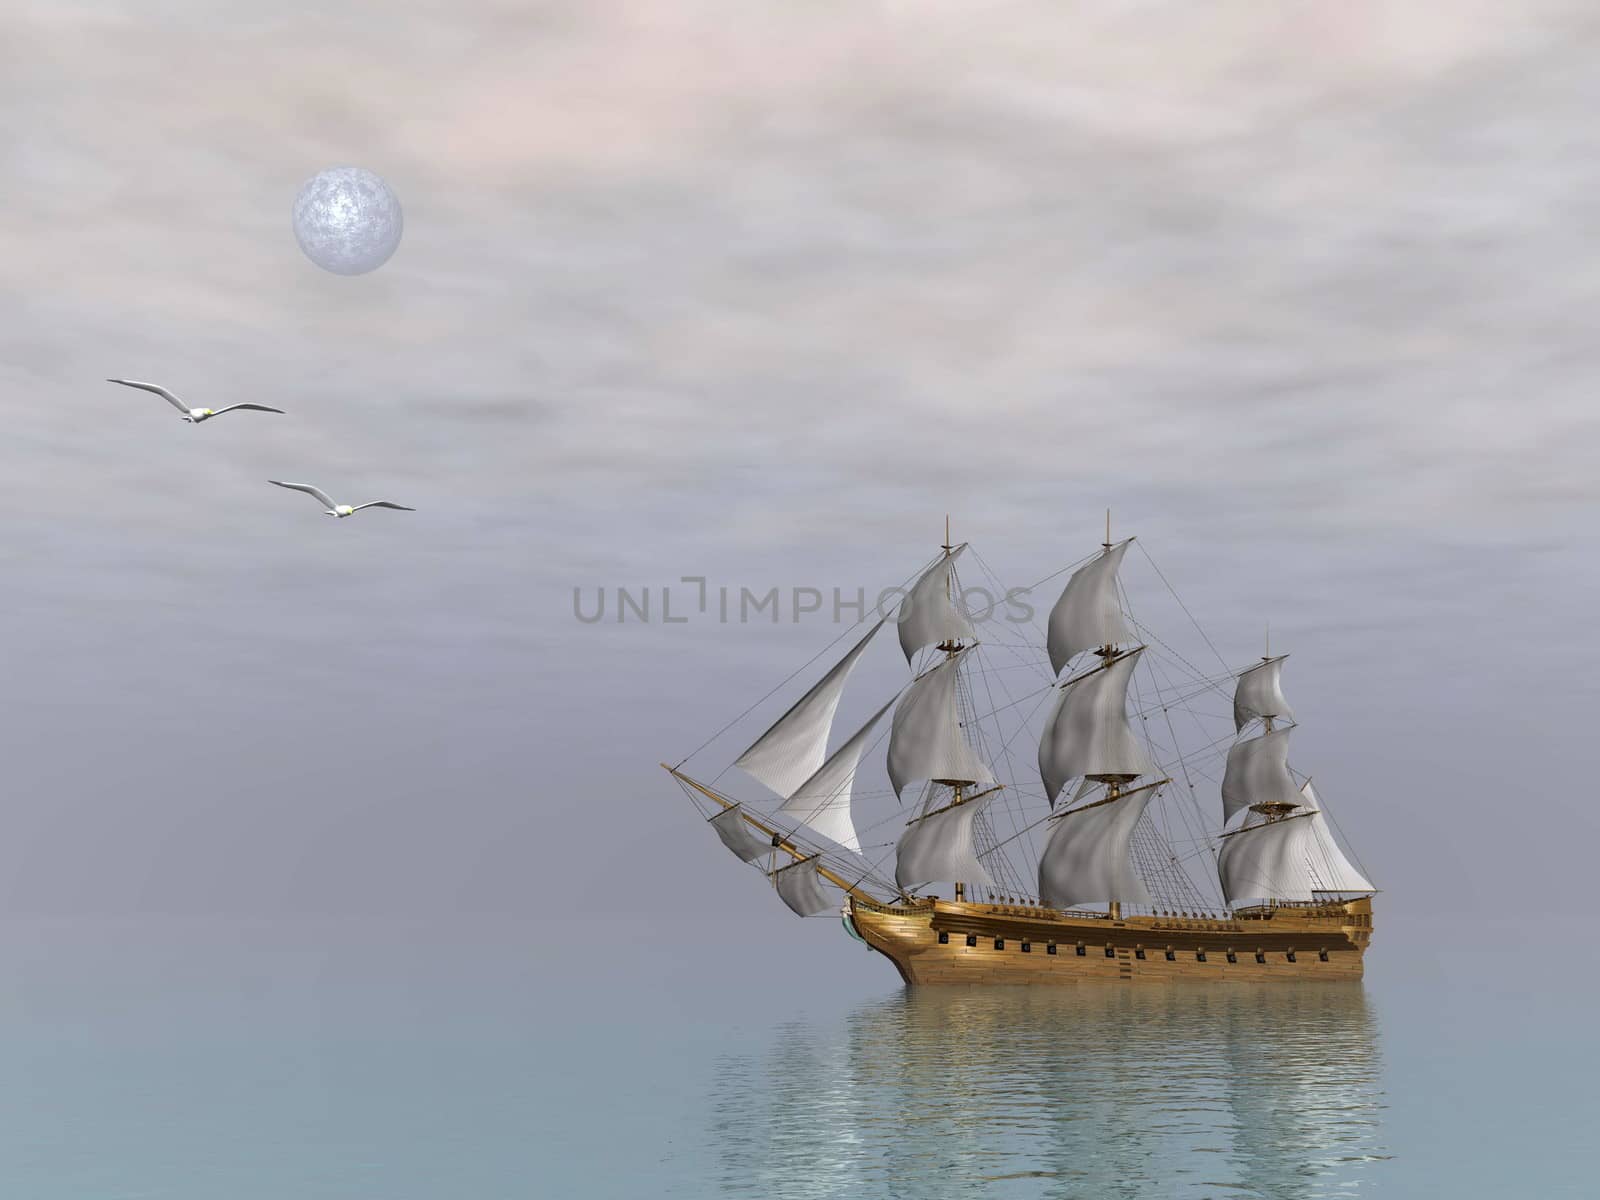 Beautiful detailed old merchant ship on quiet ocean near seagulls and full moon by night